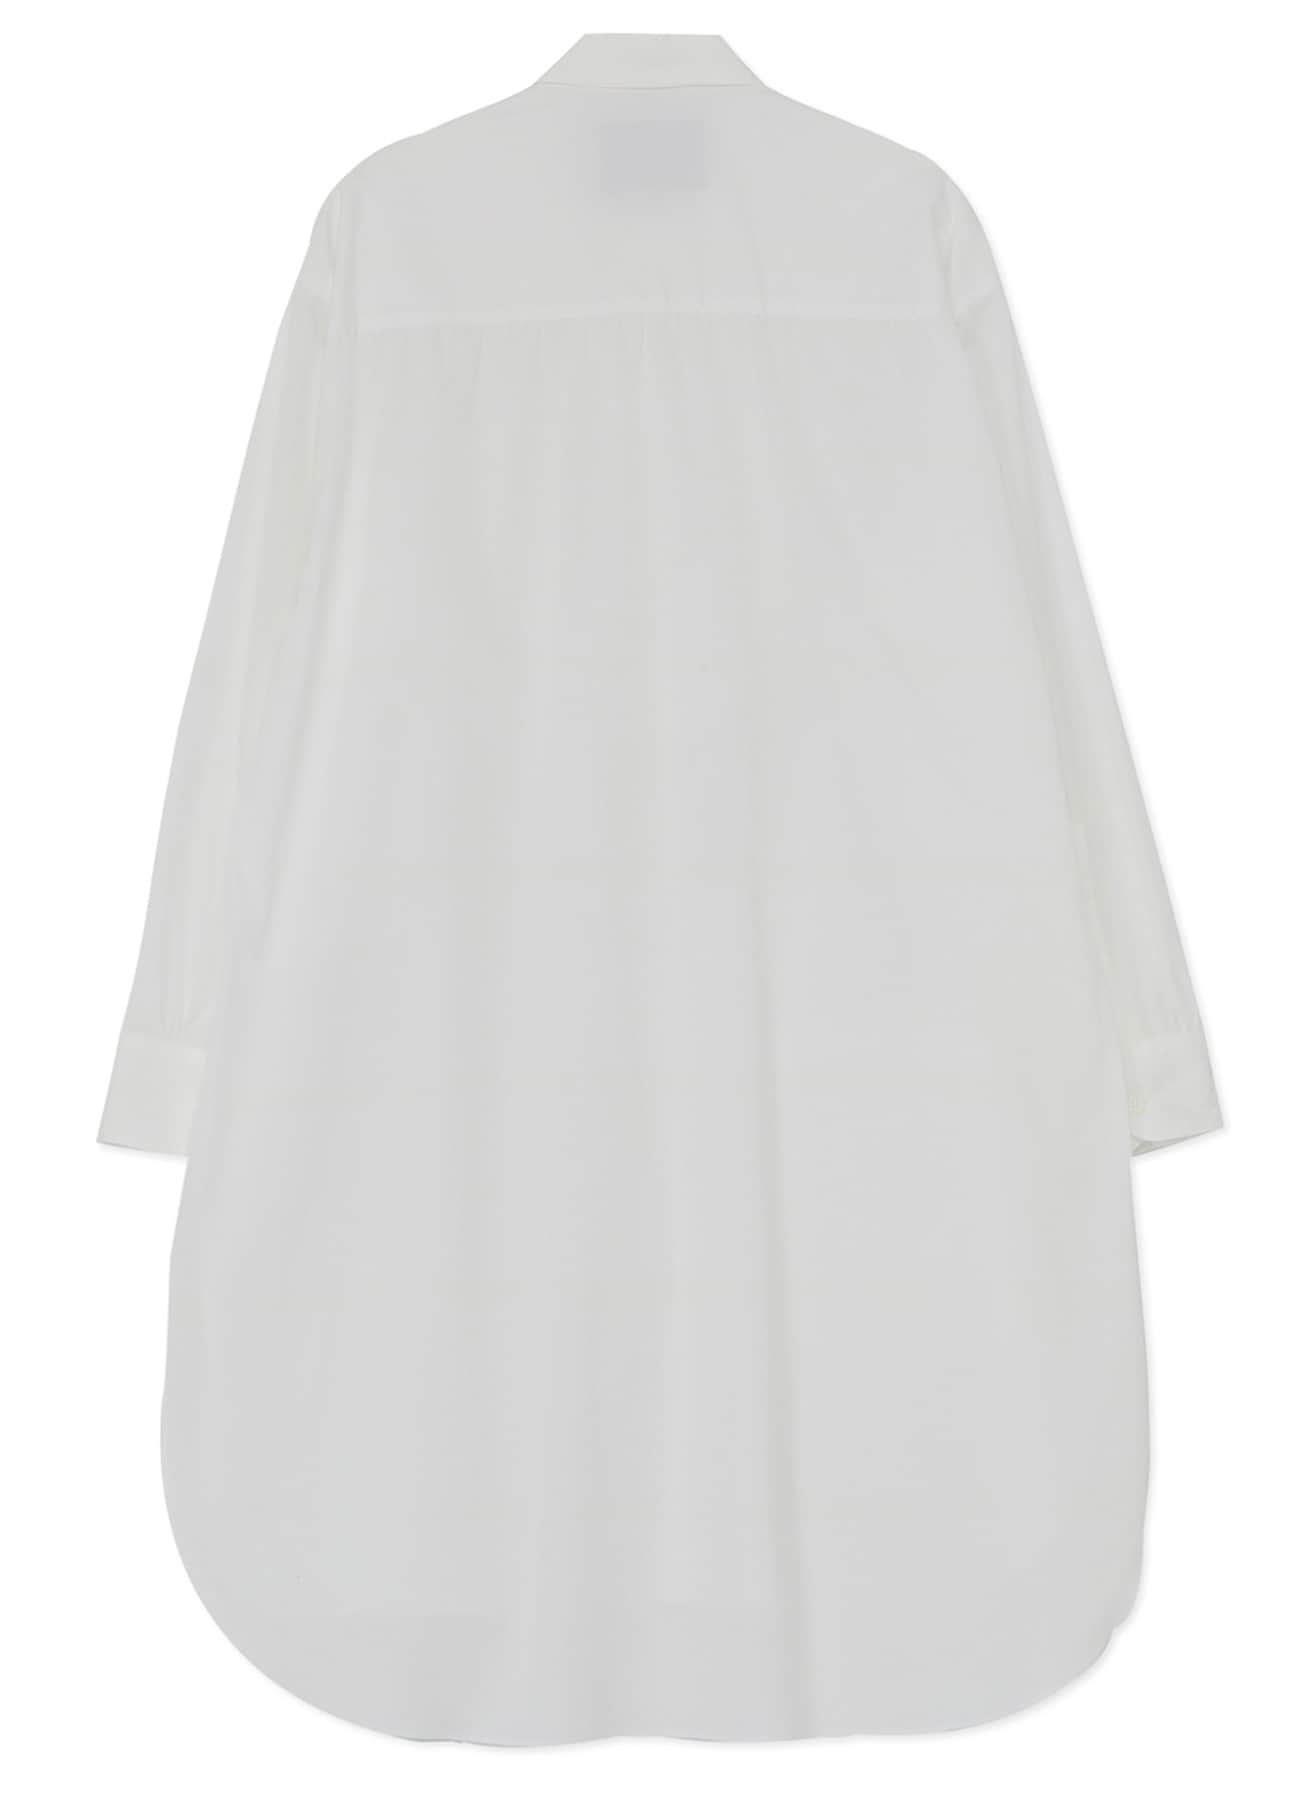 WA.T BROAD M-PATCH SPARE COLLAR BIG B(XS White): power of the 